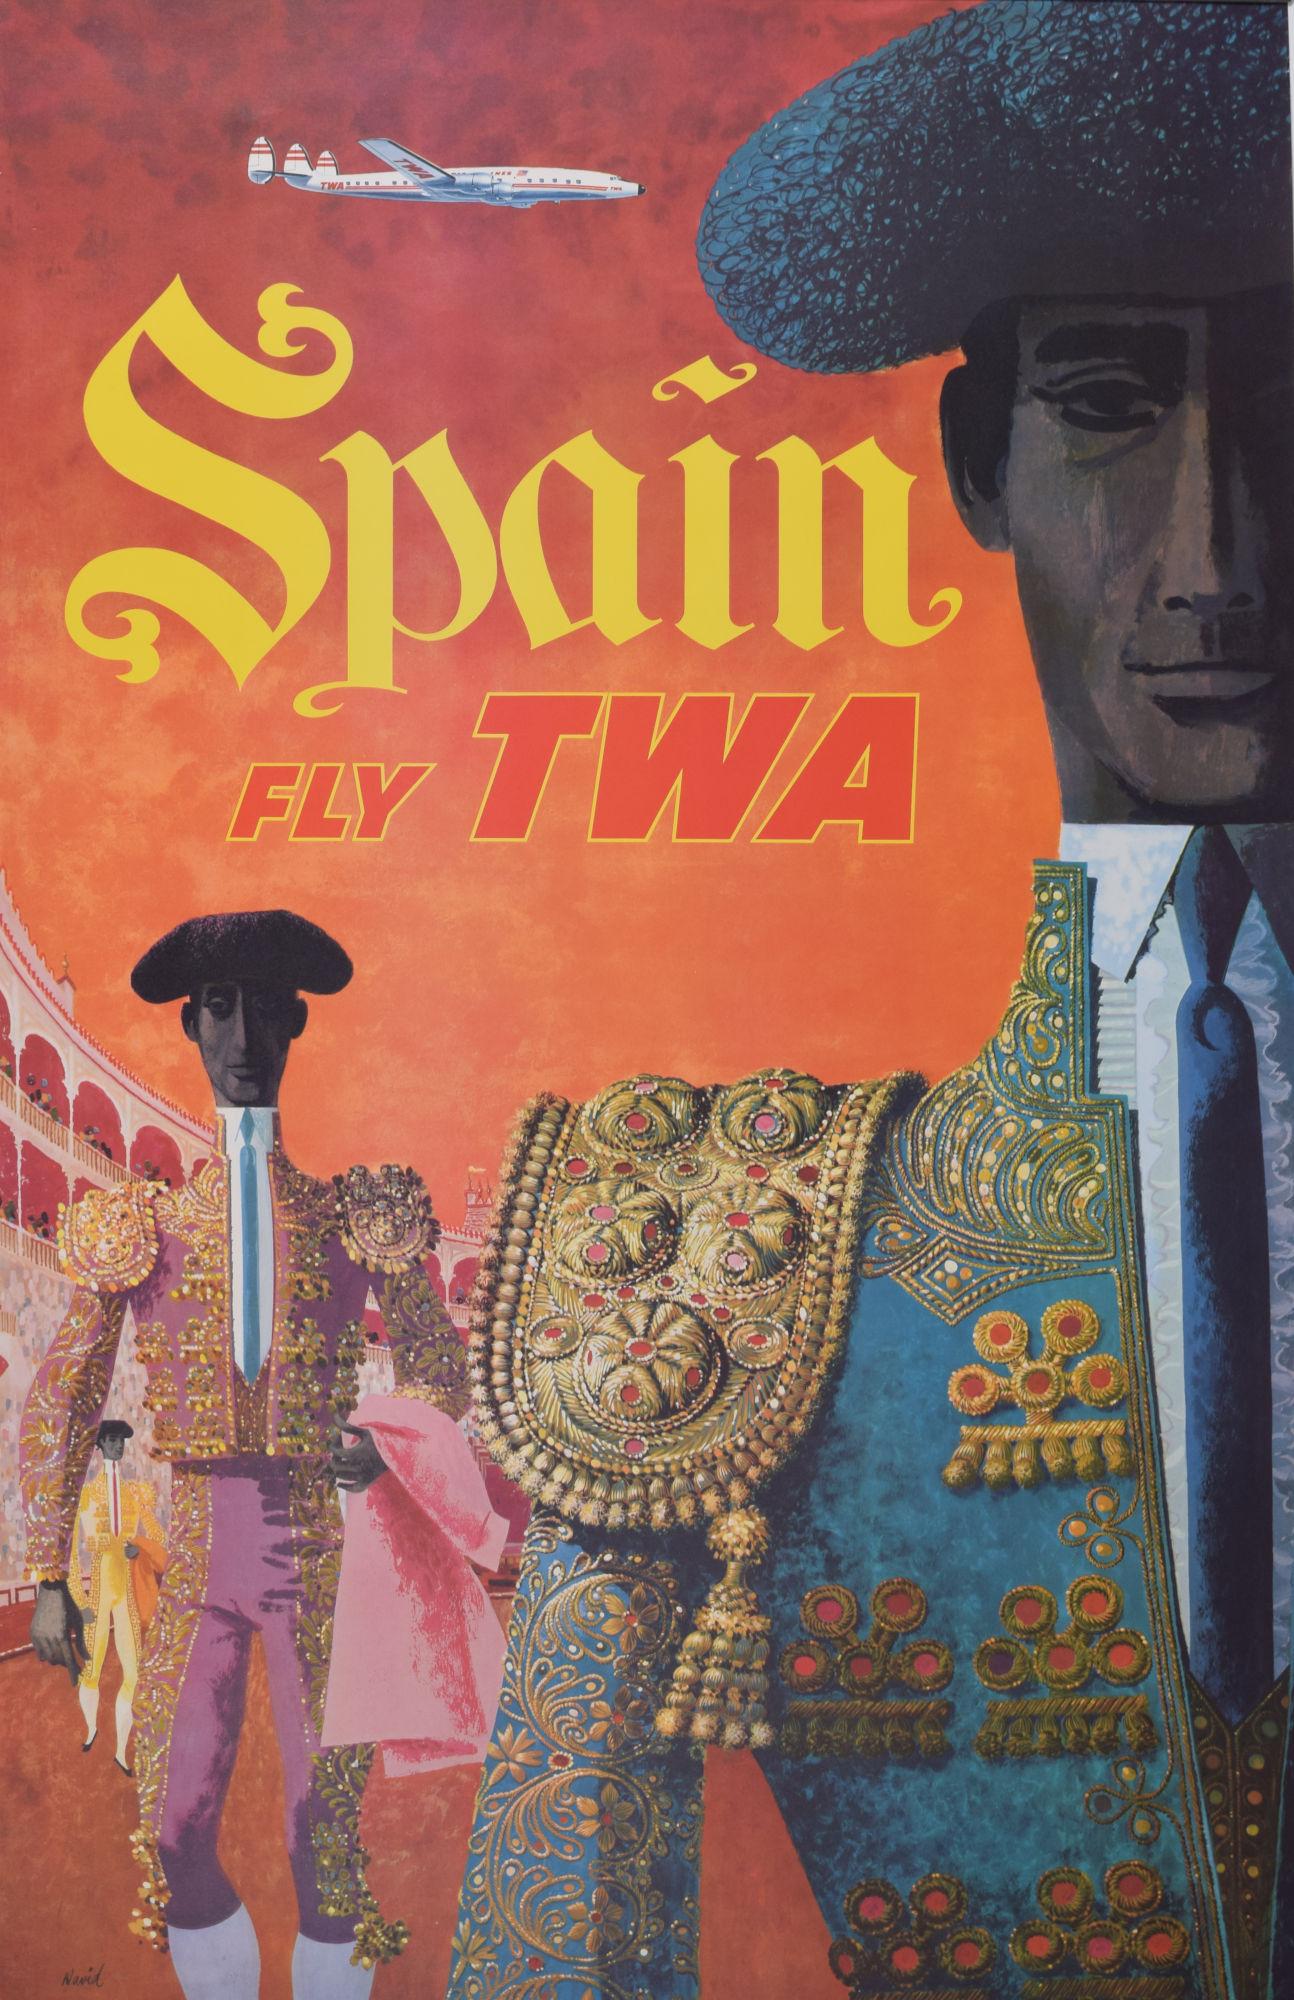 To see our other original vintage travel posters, scroll down to "More from this Seller" and below it click on "See all from this Seller" - or send us a message if you cannot find the poster you want.

David Klein (1918 - 2005)
Spain - Fly